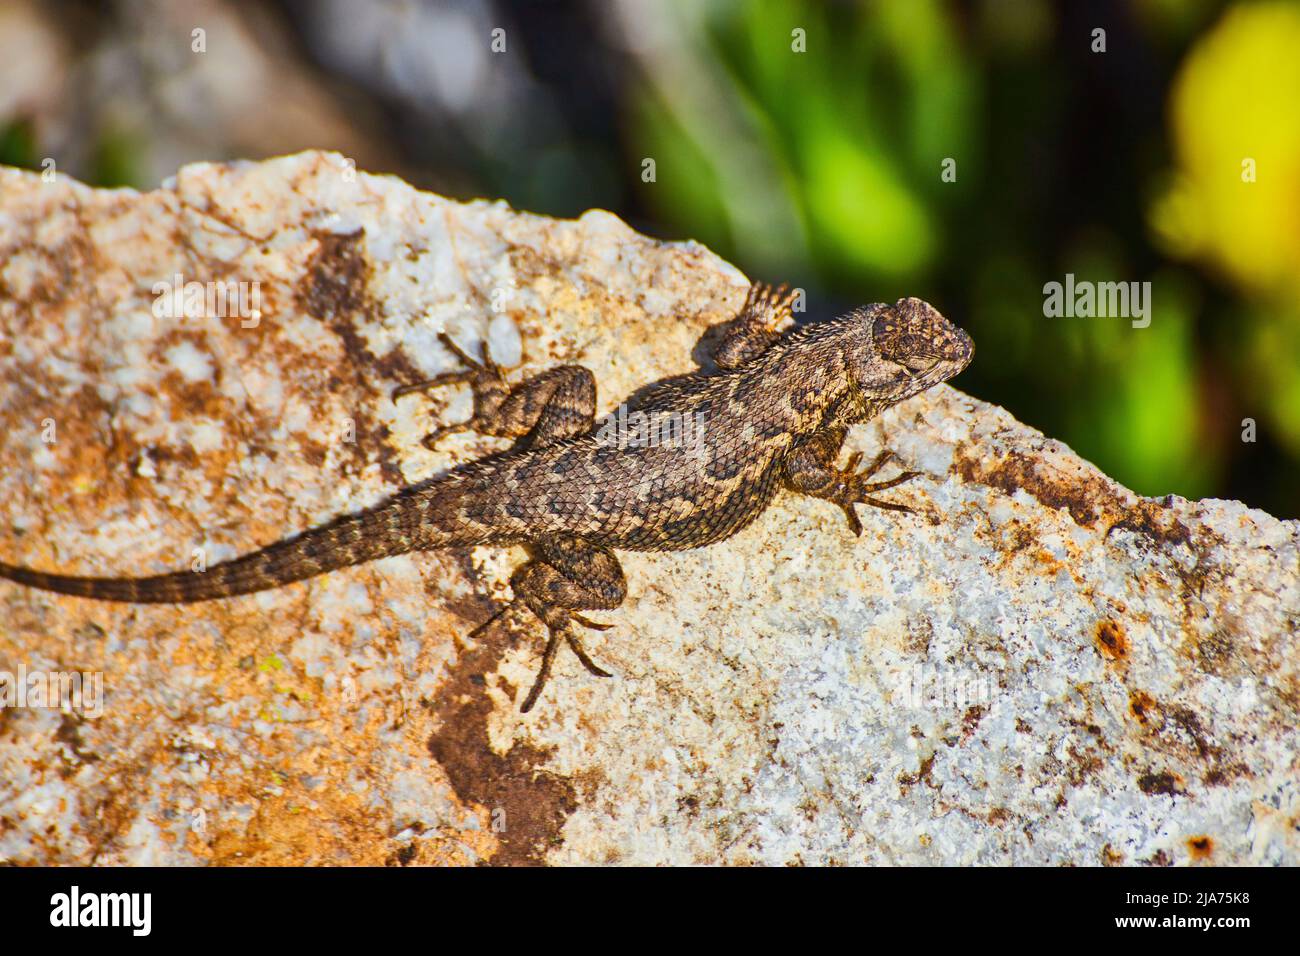 Detail of small lizard resting on large rock with spring flowers in background Stock Photo